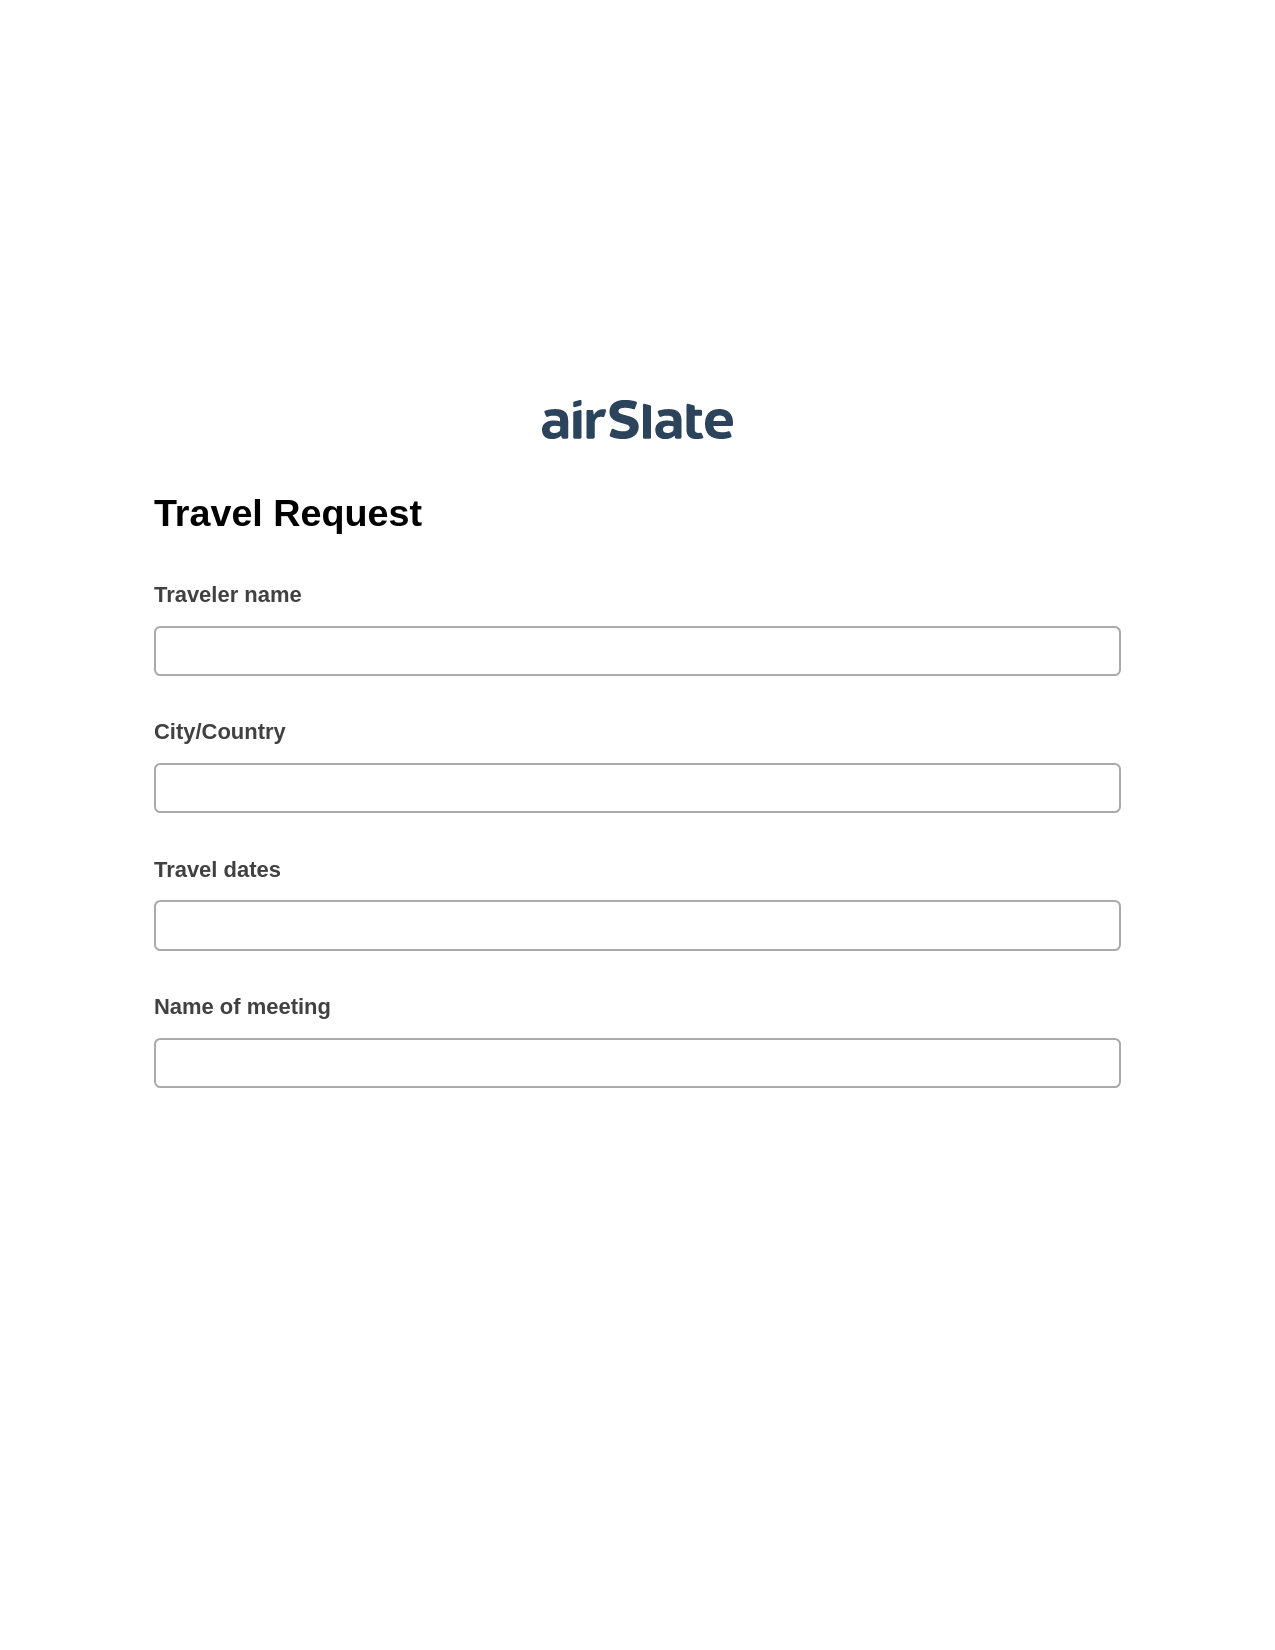 Travel Request Pre-fill Dropdowns from Excel Bot, Create slate addon, Export to Excel 365 Bot